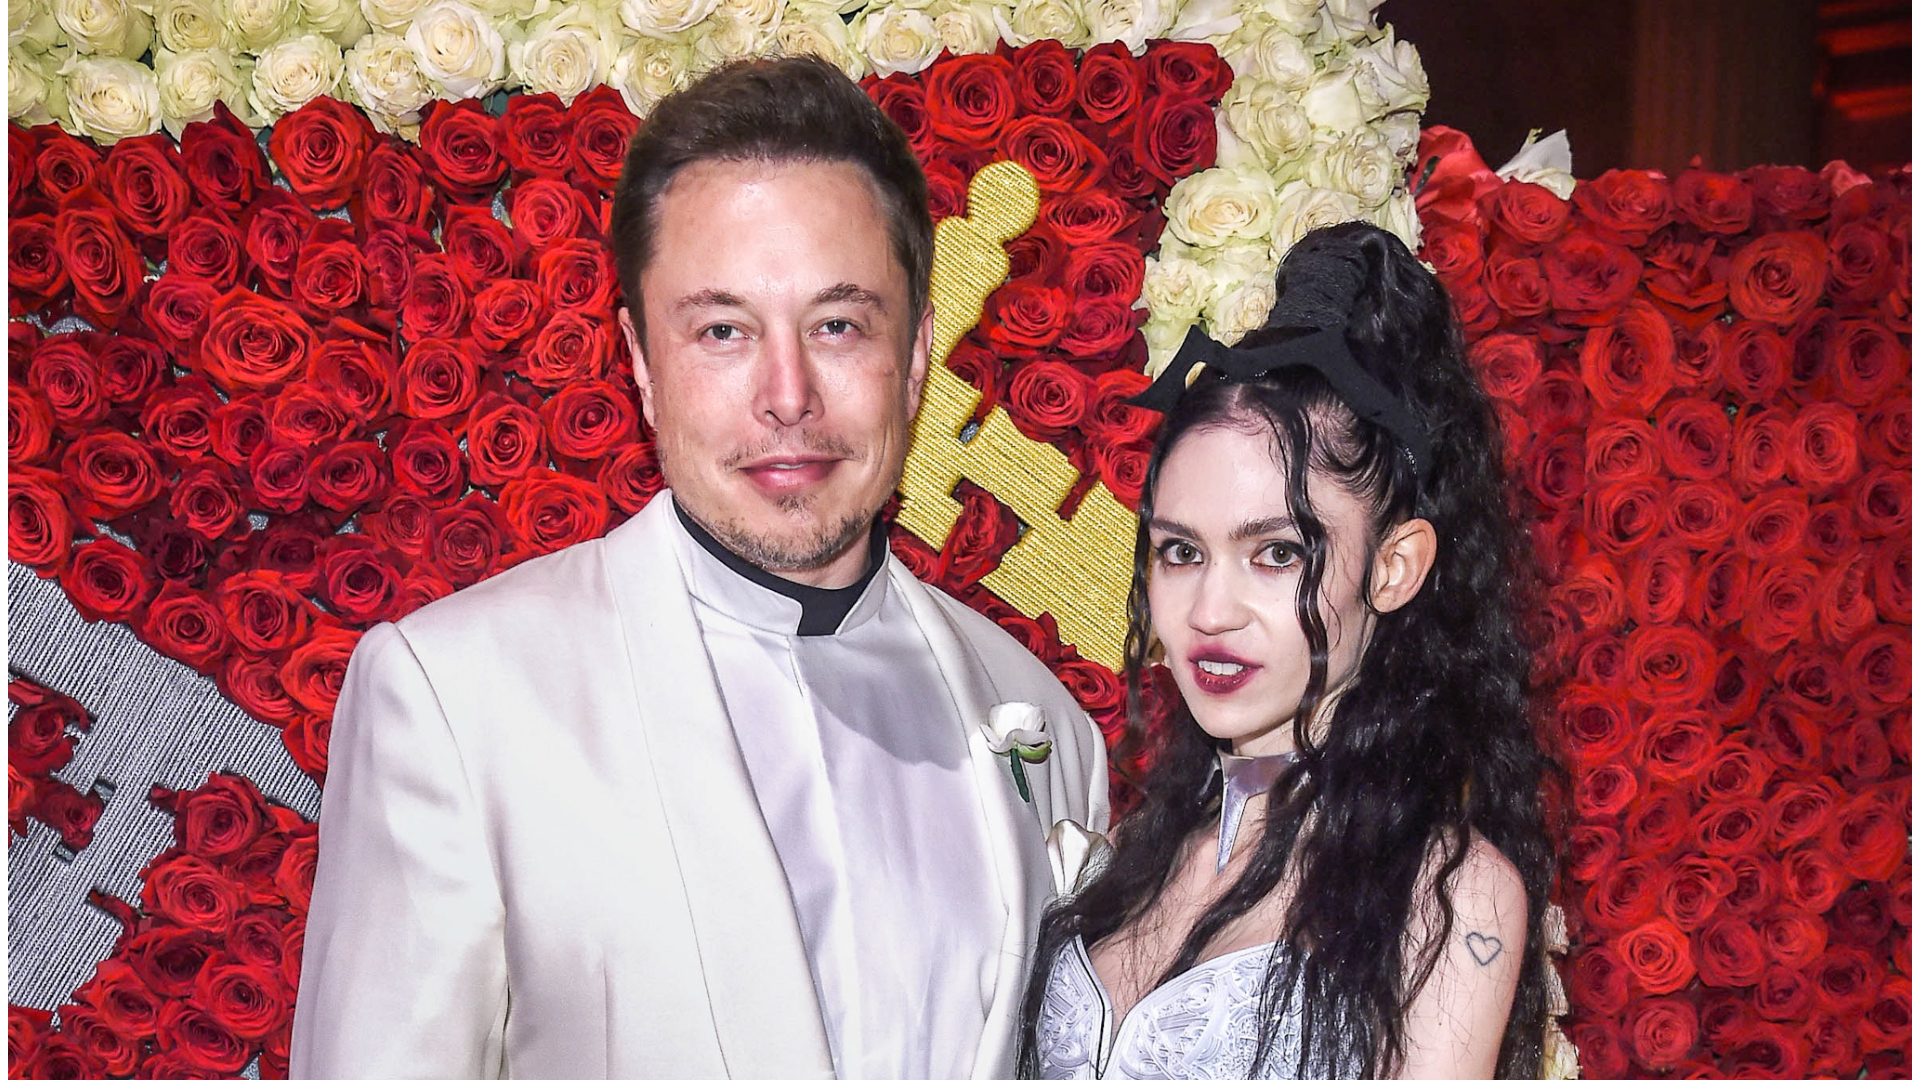 Grimes Apparently Says Elon Musk May Be Entering "Demon Mode"